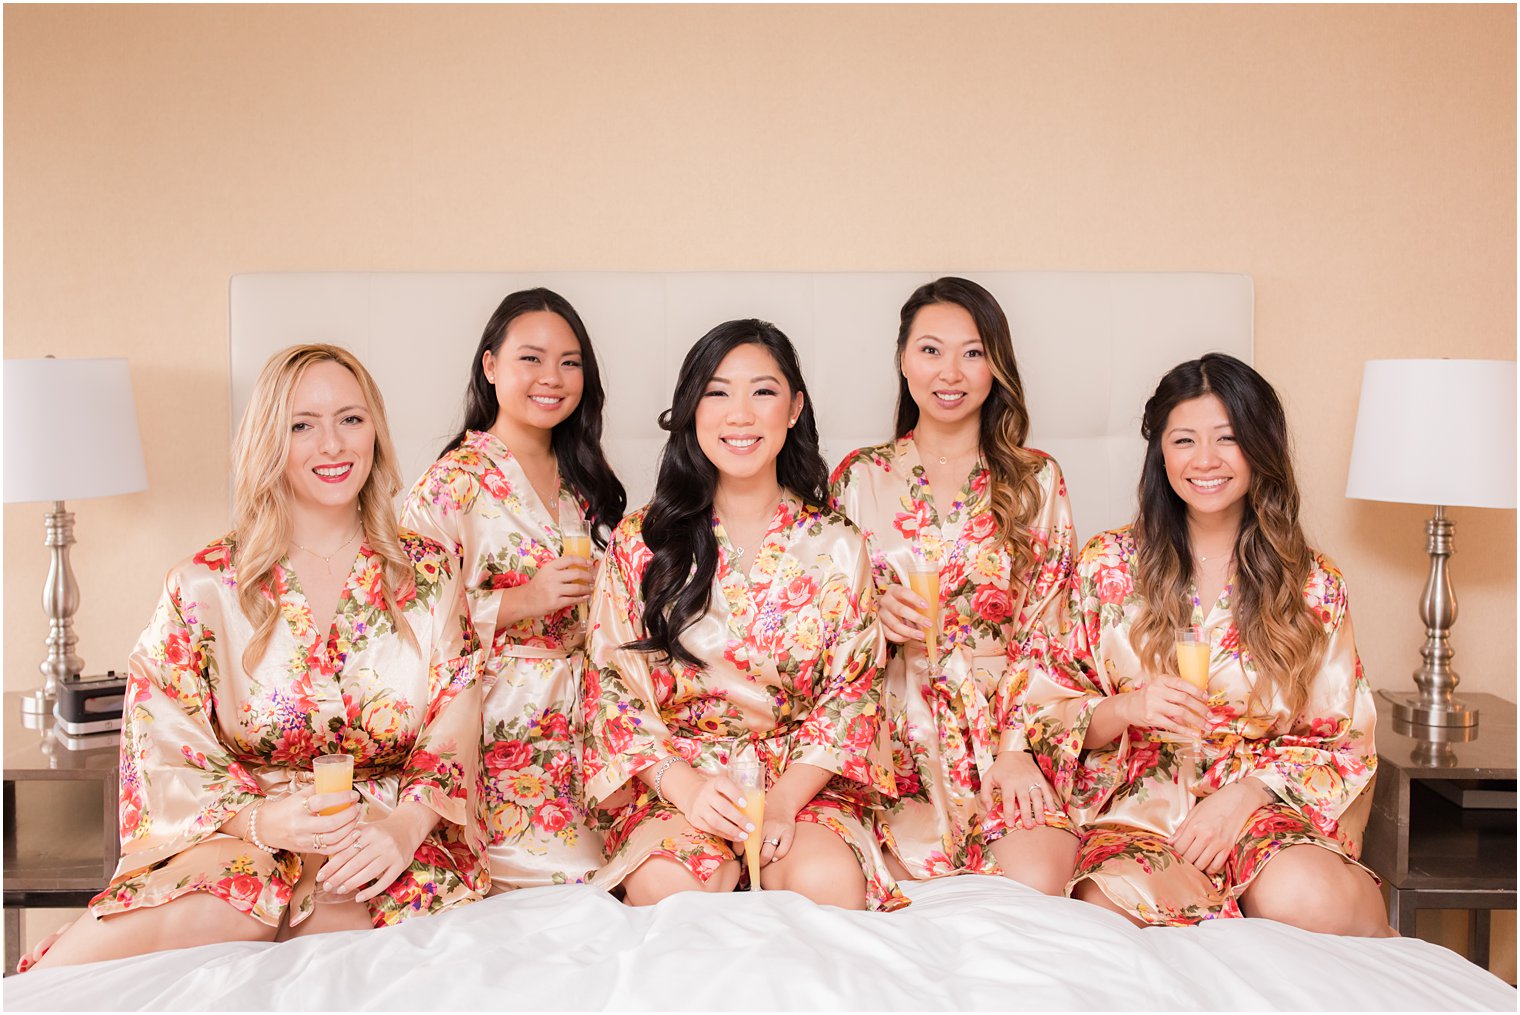 Bride and bridesmaids in robes and drinking mimosas